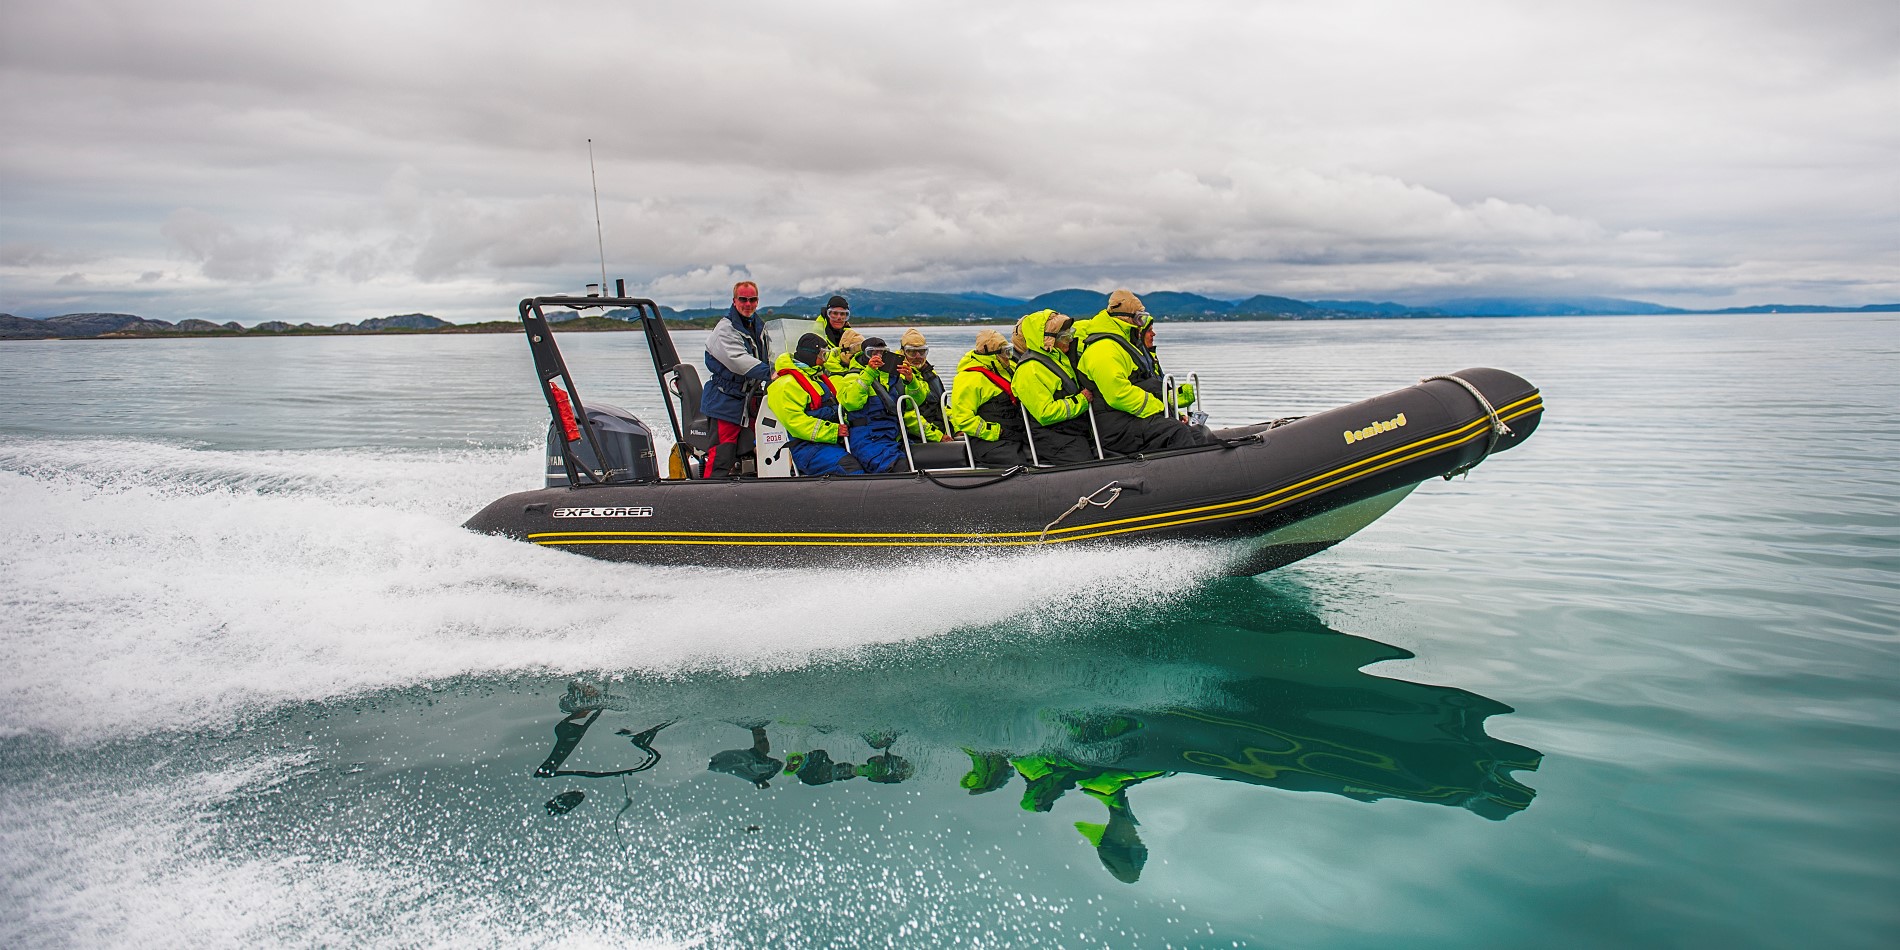 A RIB with 10 people speeding in Norway